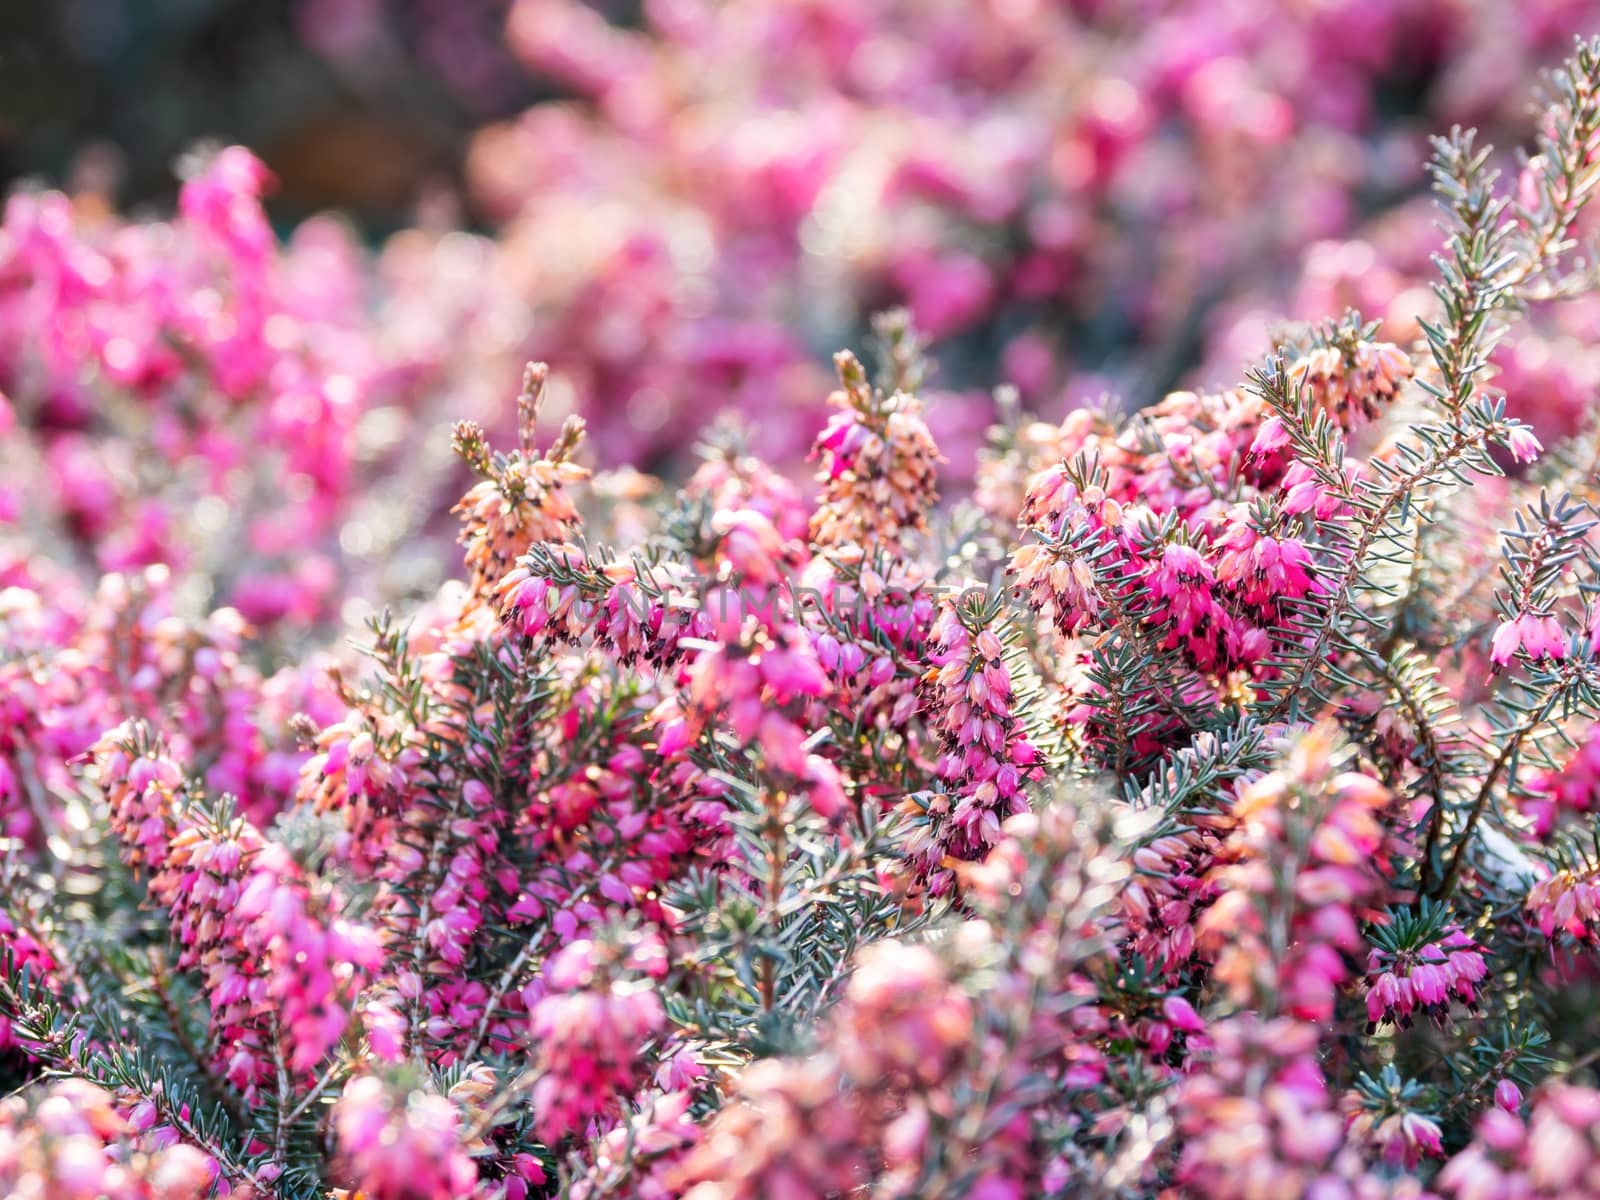 Blooming Calluna vulgaris, known as common heather, ling, or simply heather. Natural spring background with sun shining through pink beautiful flowers. by aksenovko